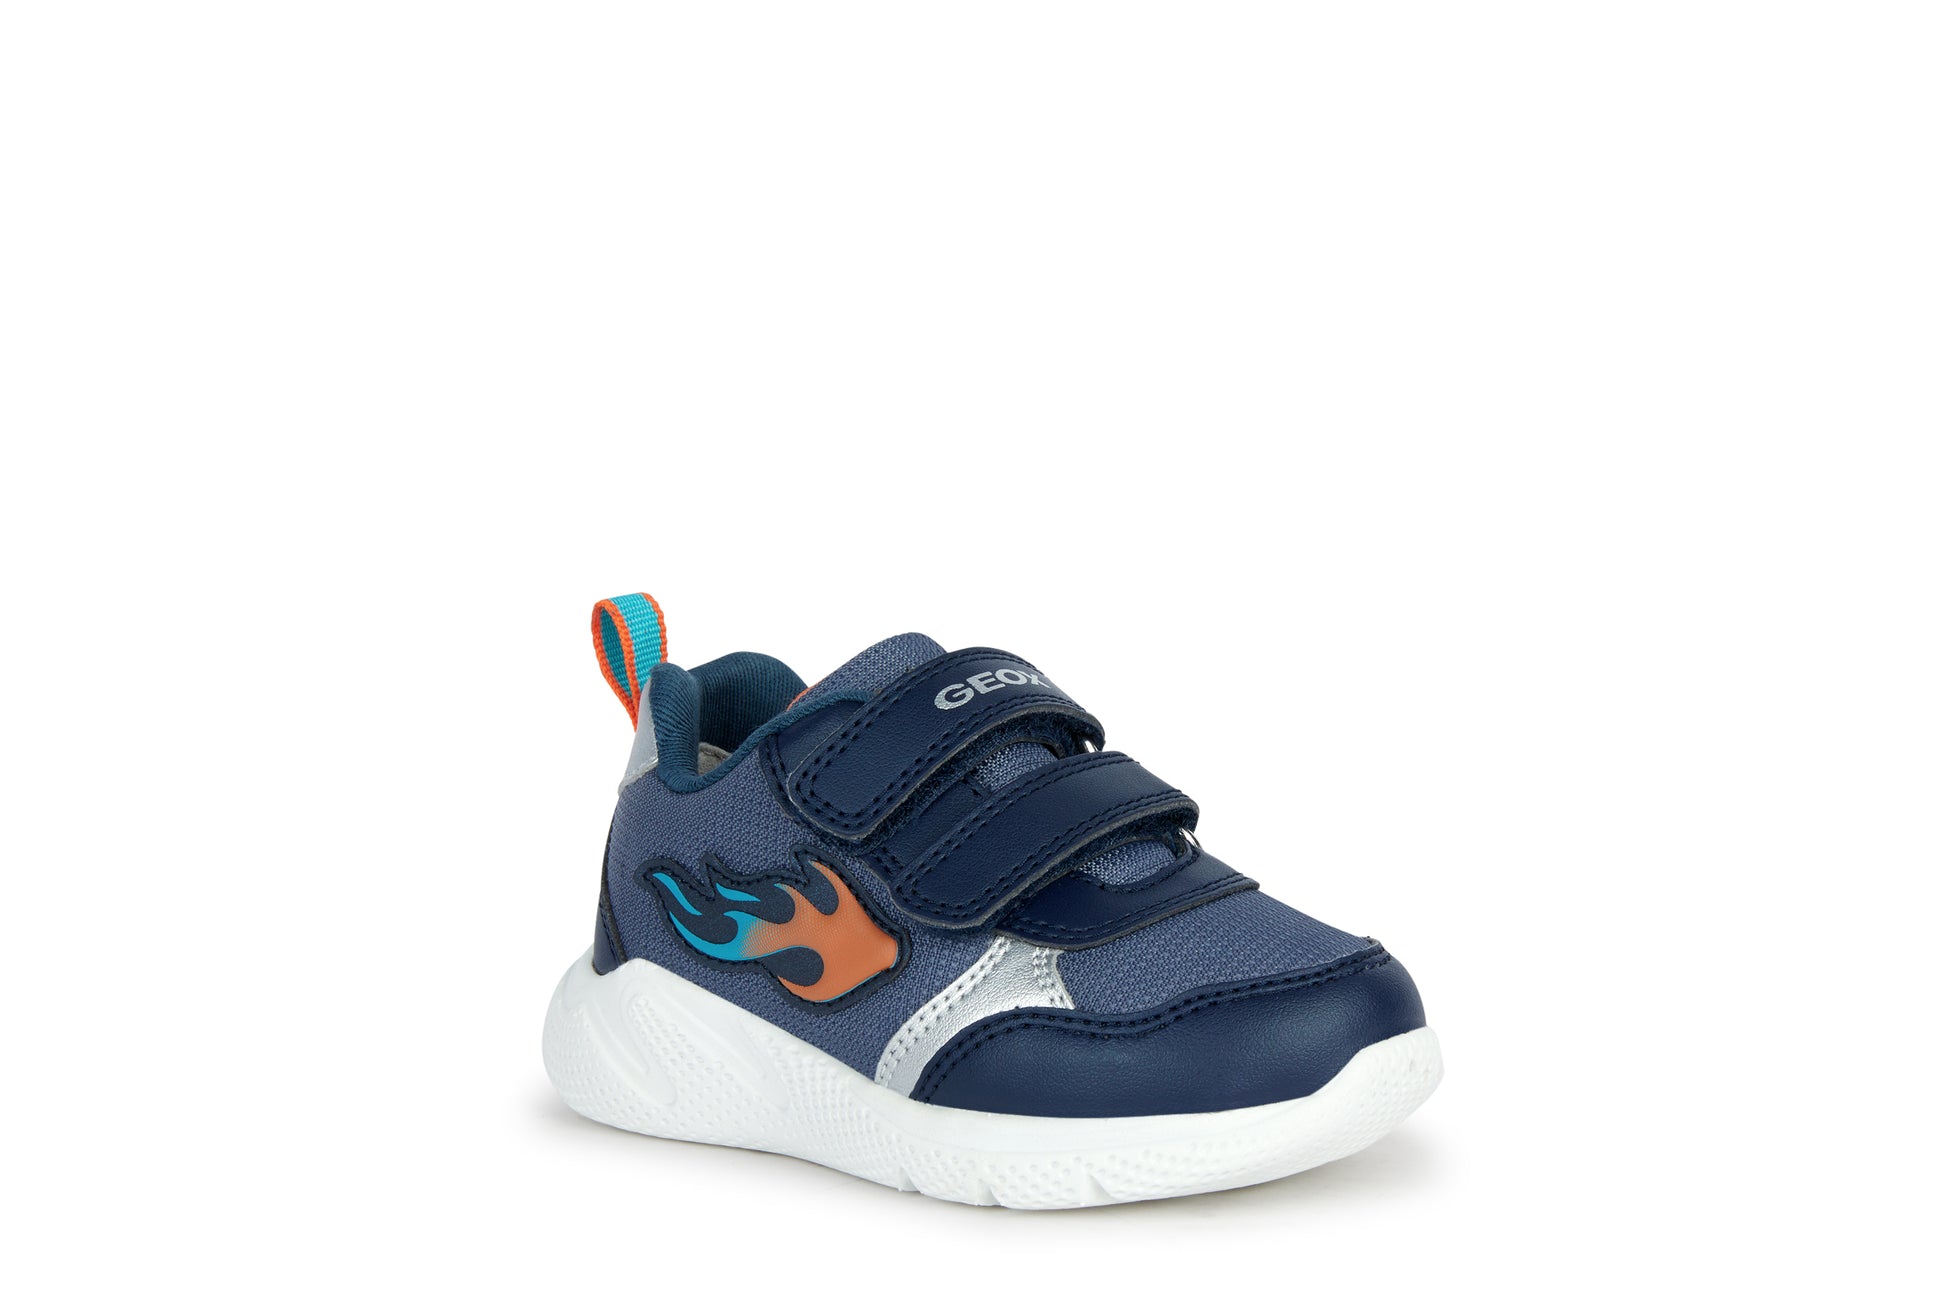 A boys trainer by Geox, style Sprintye, in navy and orange with double velcro fastening. Angled view.